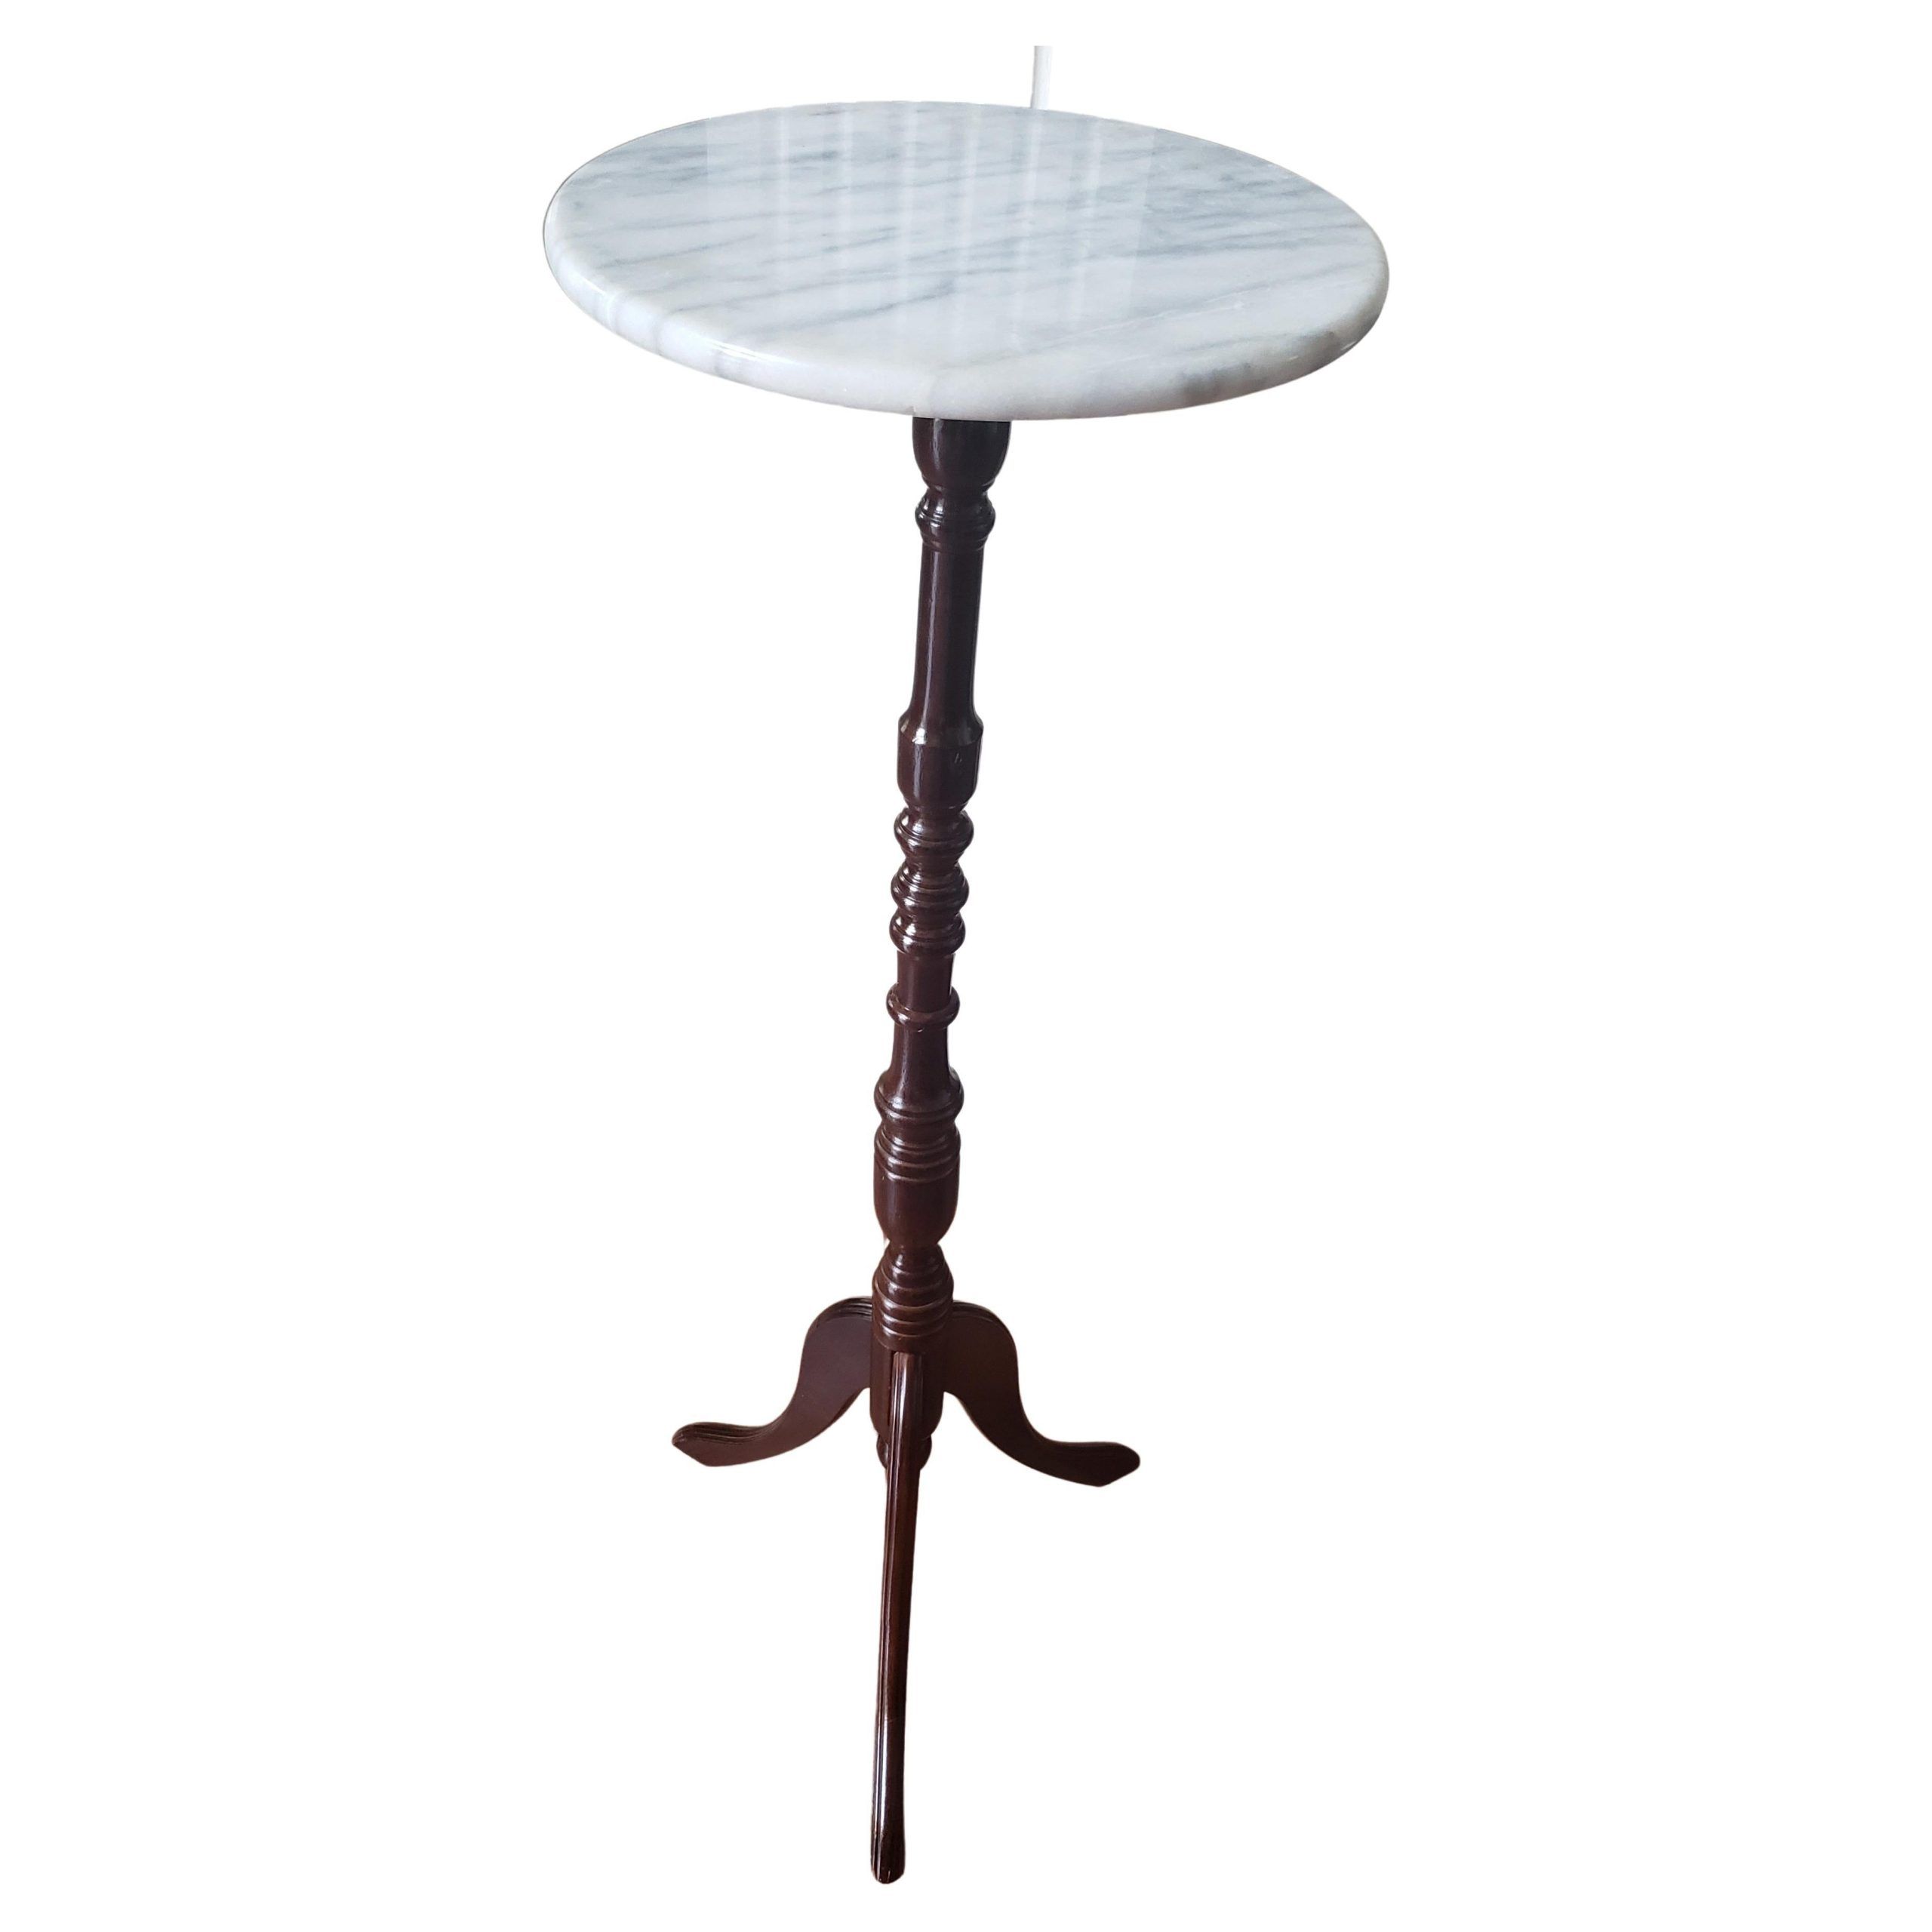 Pedestal Mahogany Plant Stand With Marble Top At 1stdibs (View 7 of 10)